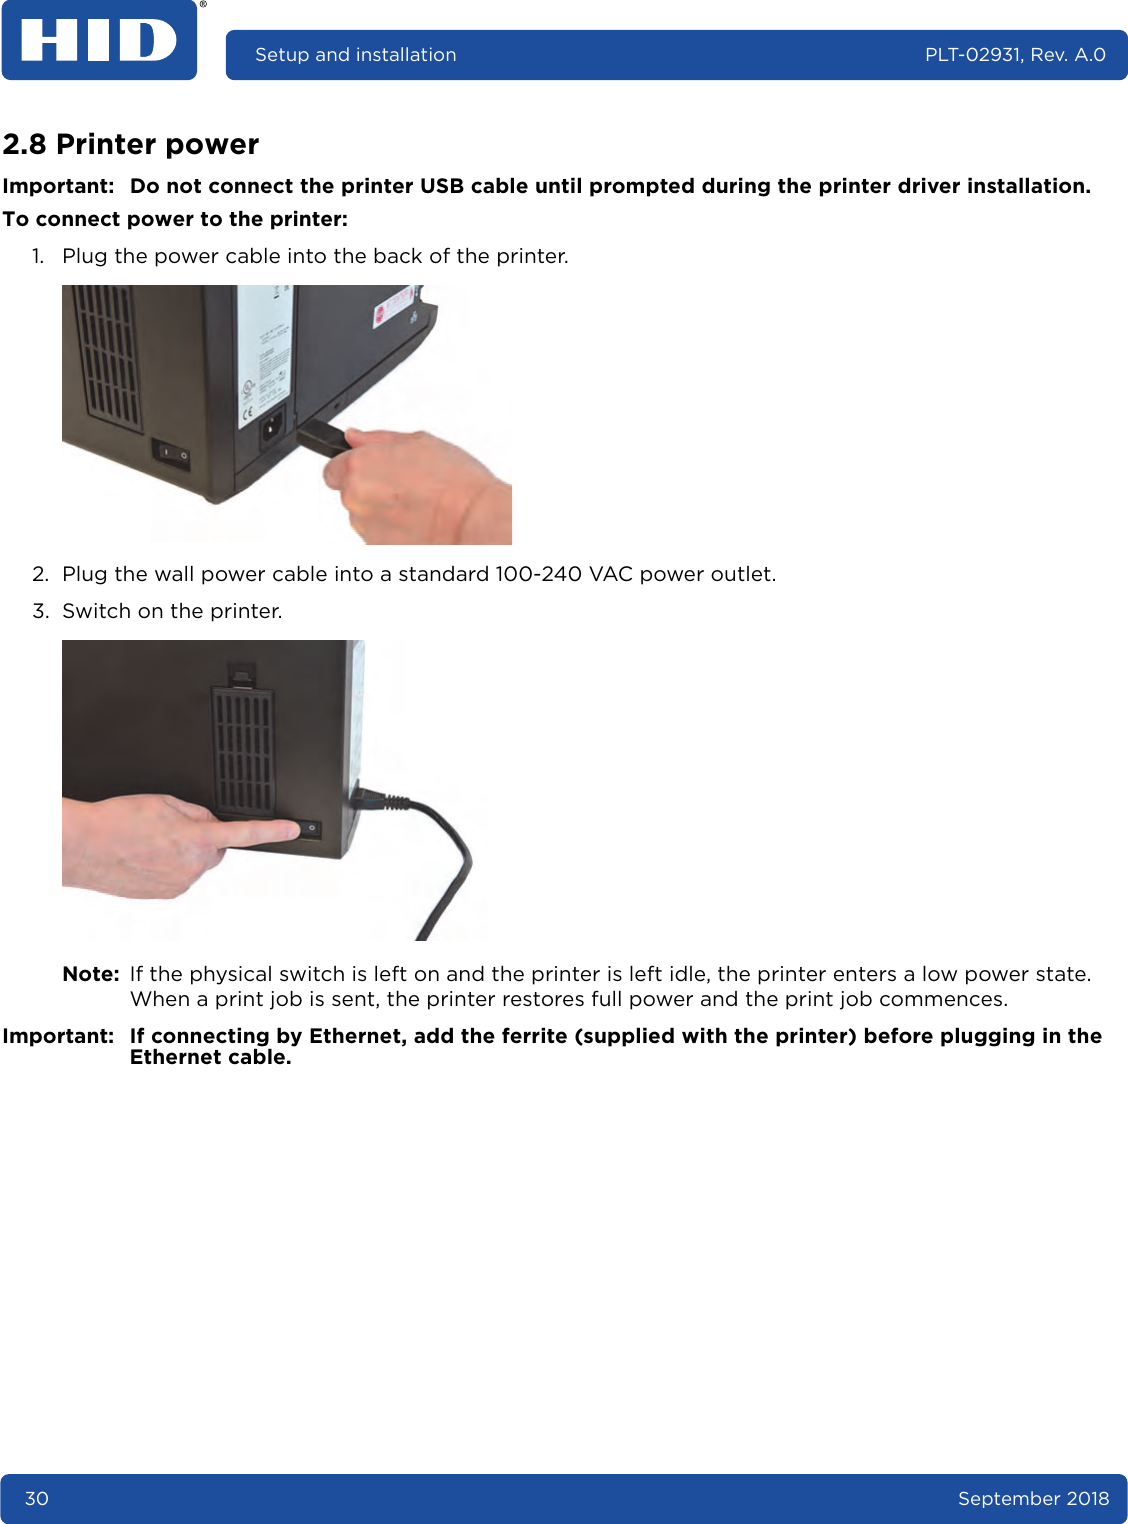 30 September 2018Setup and installation PLT-02931, Rev. A.02.8 Printer powerImportant: Do not connect the printer USB cable until prompted during the printer driver installation.To connect power to the printer:1. Plug the power cable into the back of the printer. 2. Plug the wall power cable into a standard 100-240 VAC power outlet.3. Switch on the printer. Note: If the physical switch is left on and the printer is left idle, the printer enters a low power state. When a print job is sent, the printer restores full power and the print job commences.Important: If connecting by Ethernet, add the ferrite (supplied with the printer) before plugging in the Ethernet cable.